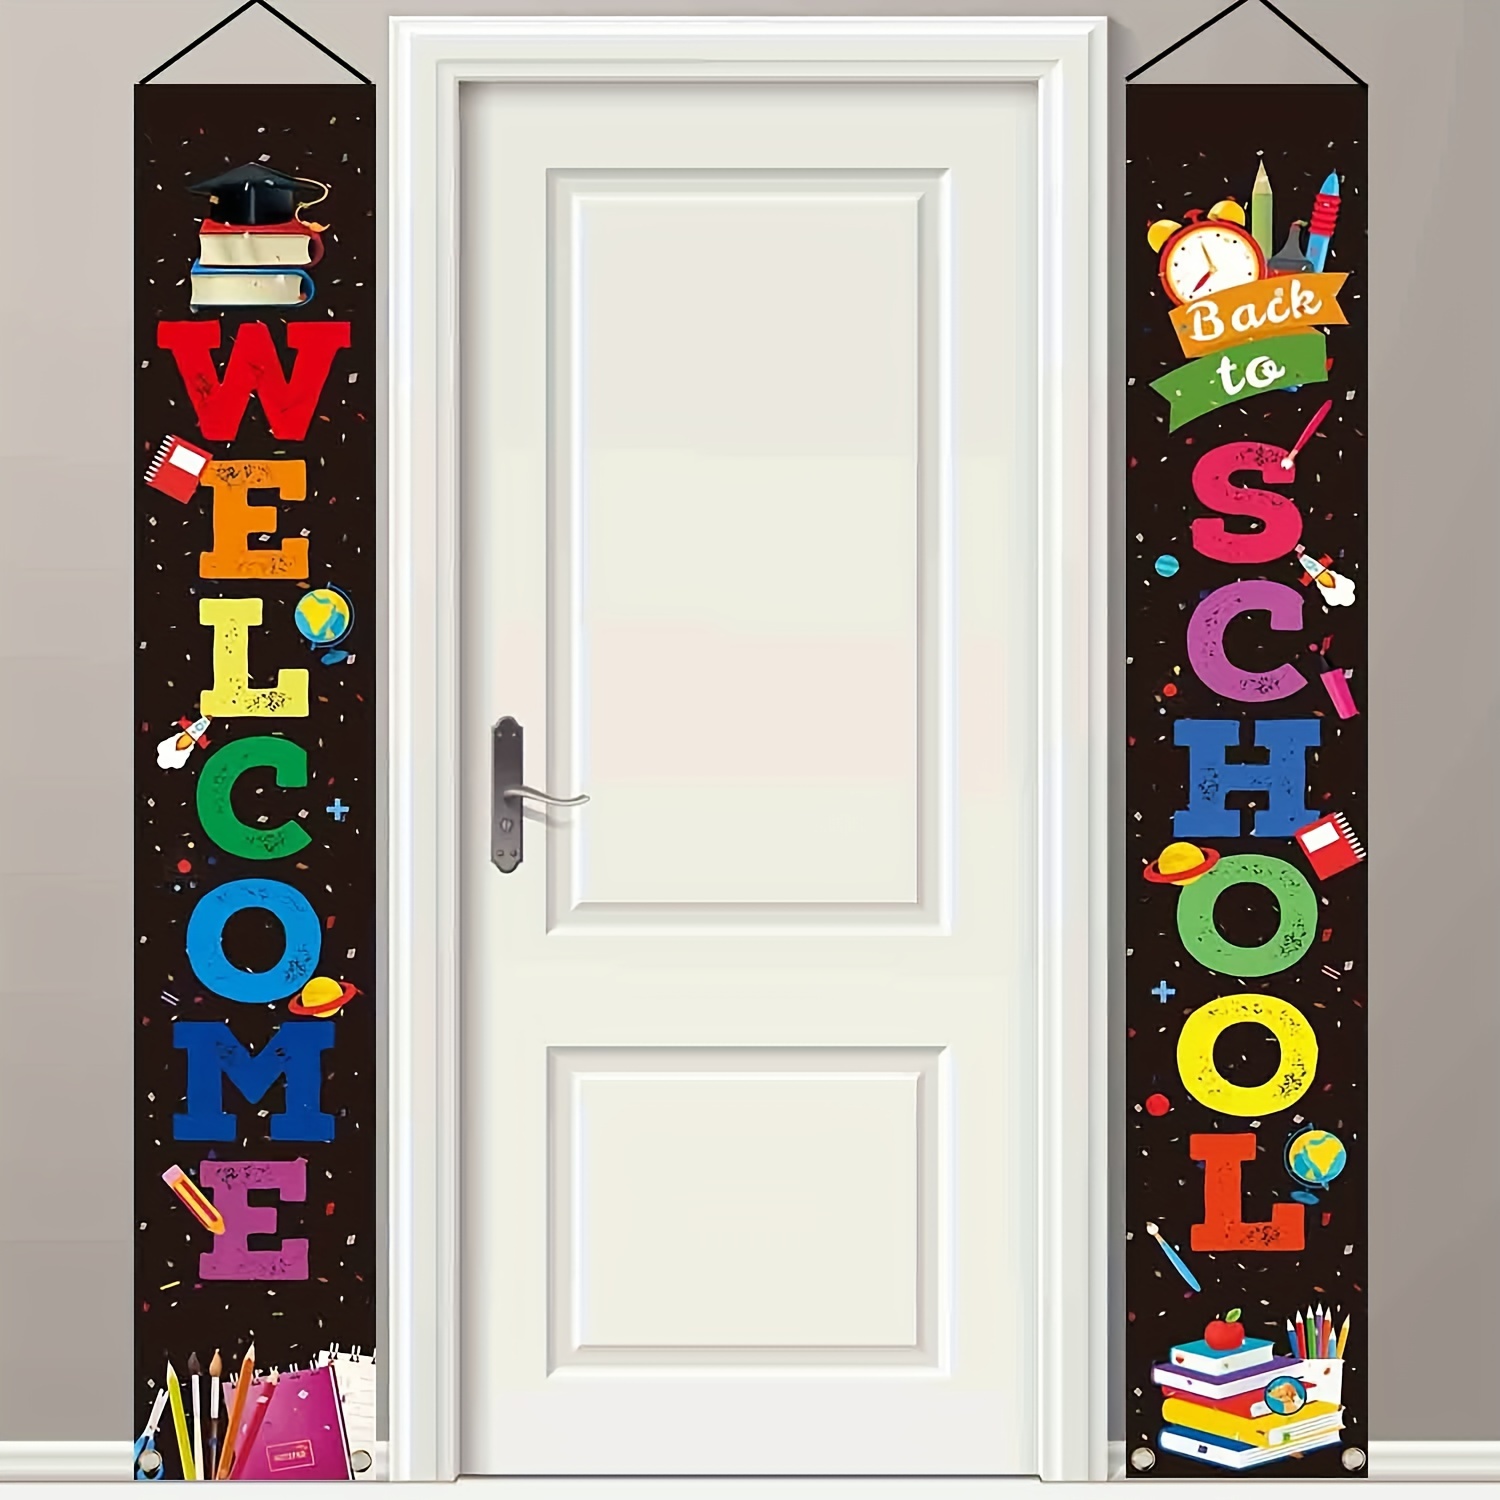 

1/2 Pairs, Back To School Welcome Banners - Porch Sign Banners, Classroom Decorations, Back To School Party Celebration Supplies, Durable Hanging Flags For Classroom & Entryway